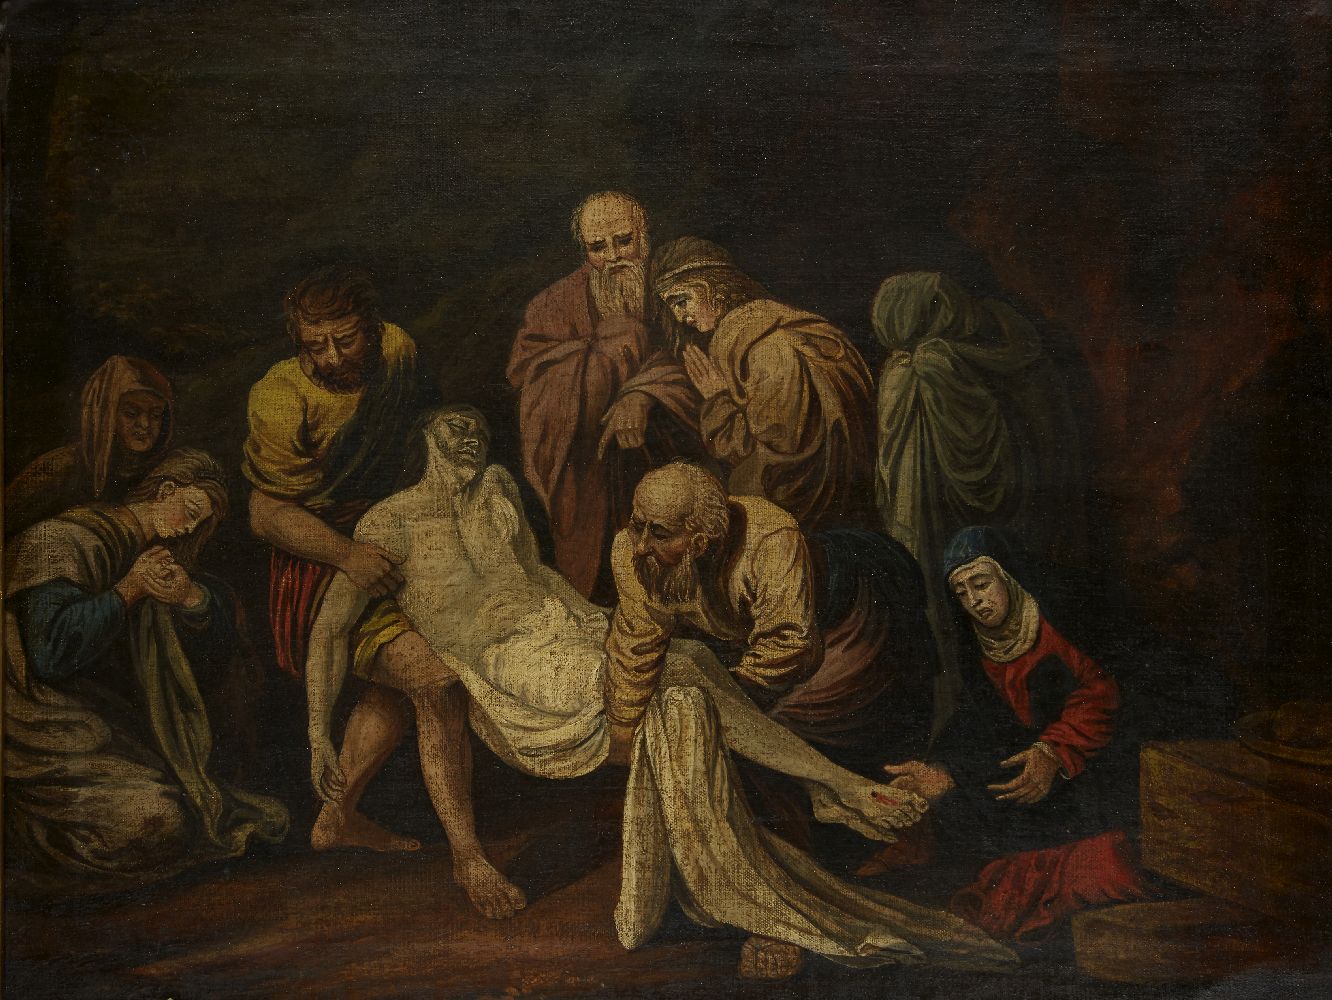 Northern European Provincial School, mid 19th Century- The Deposition of Christ; oil on canvas, 49.5